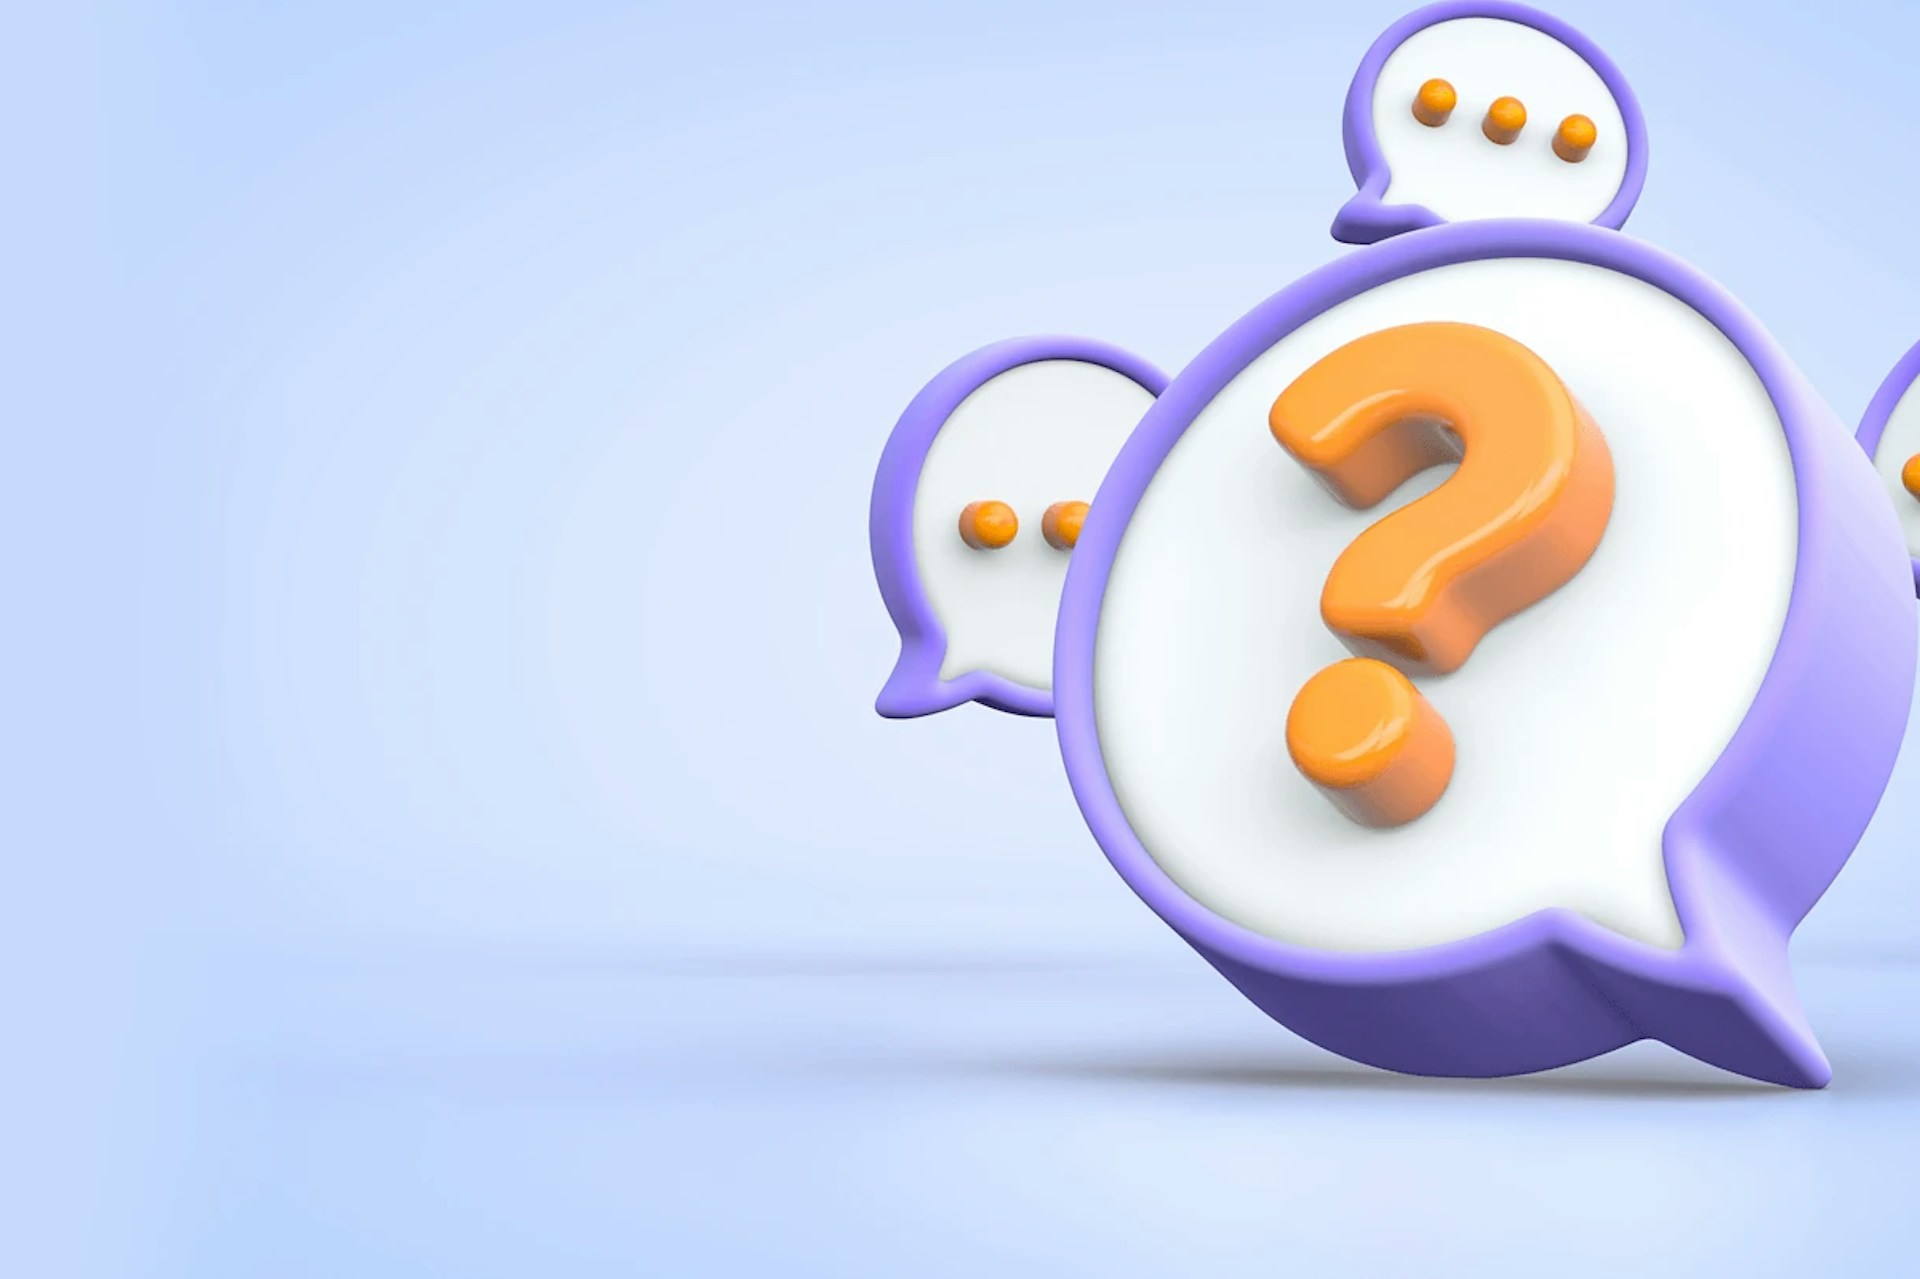 3D illustration of a question mark in a speech bubble